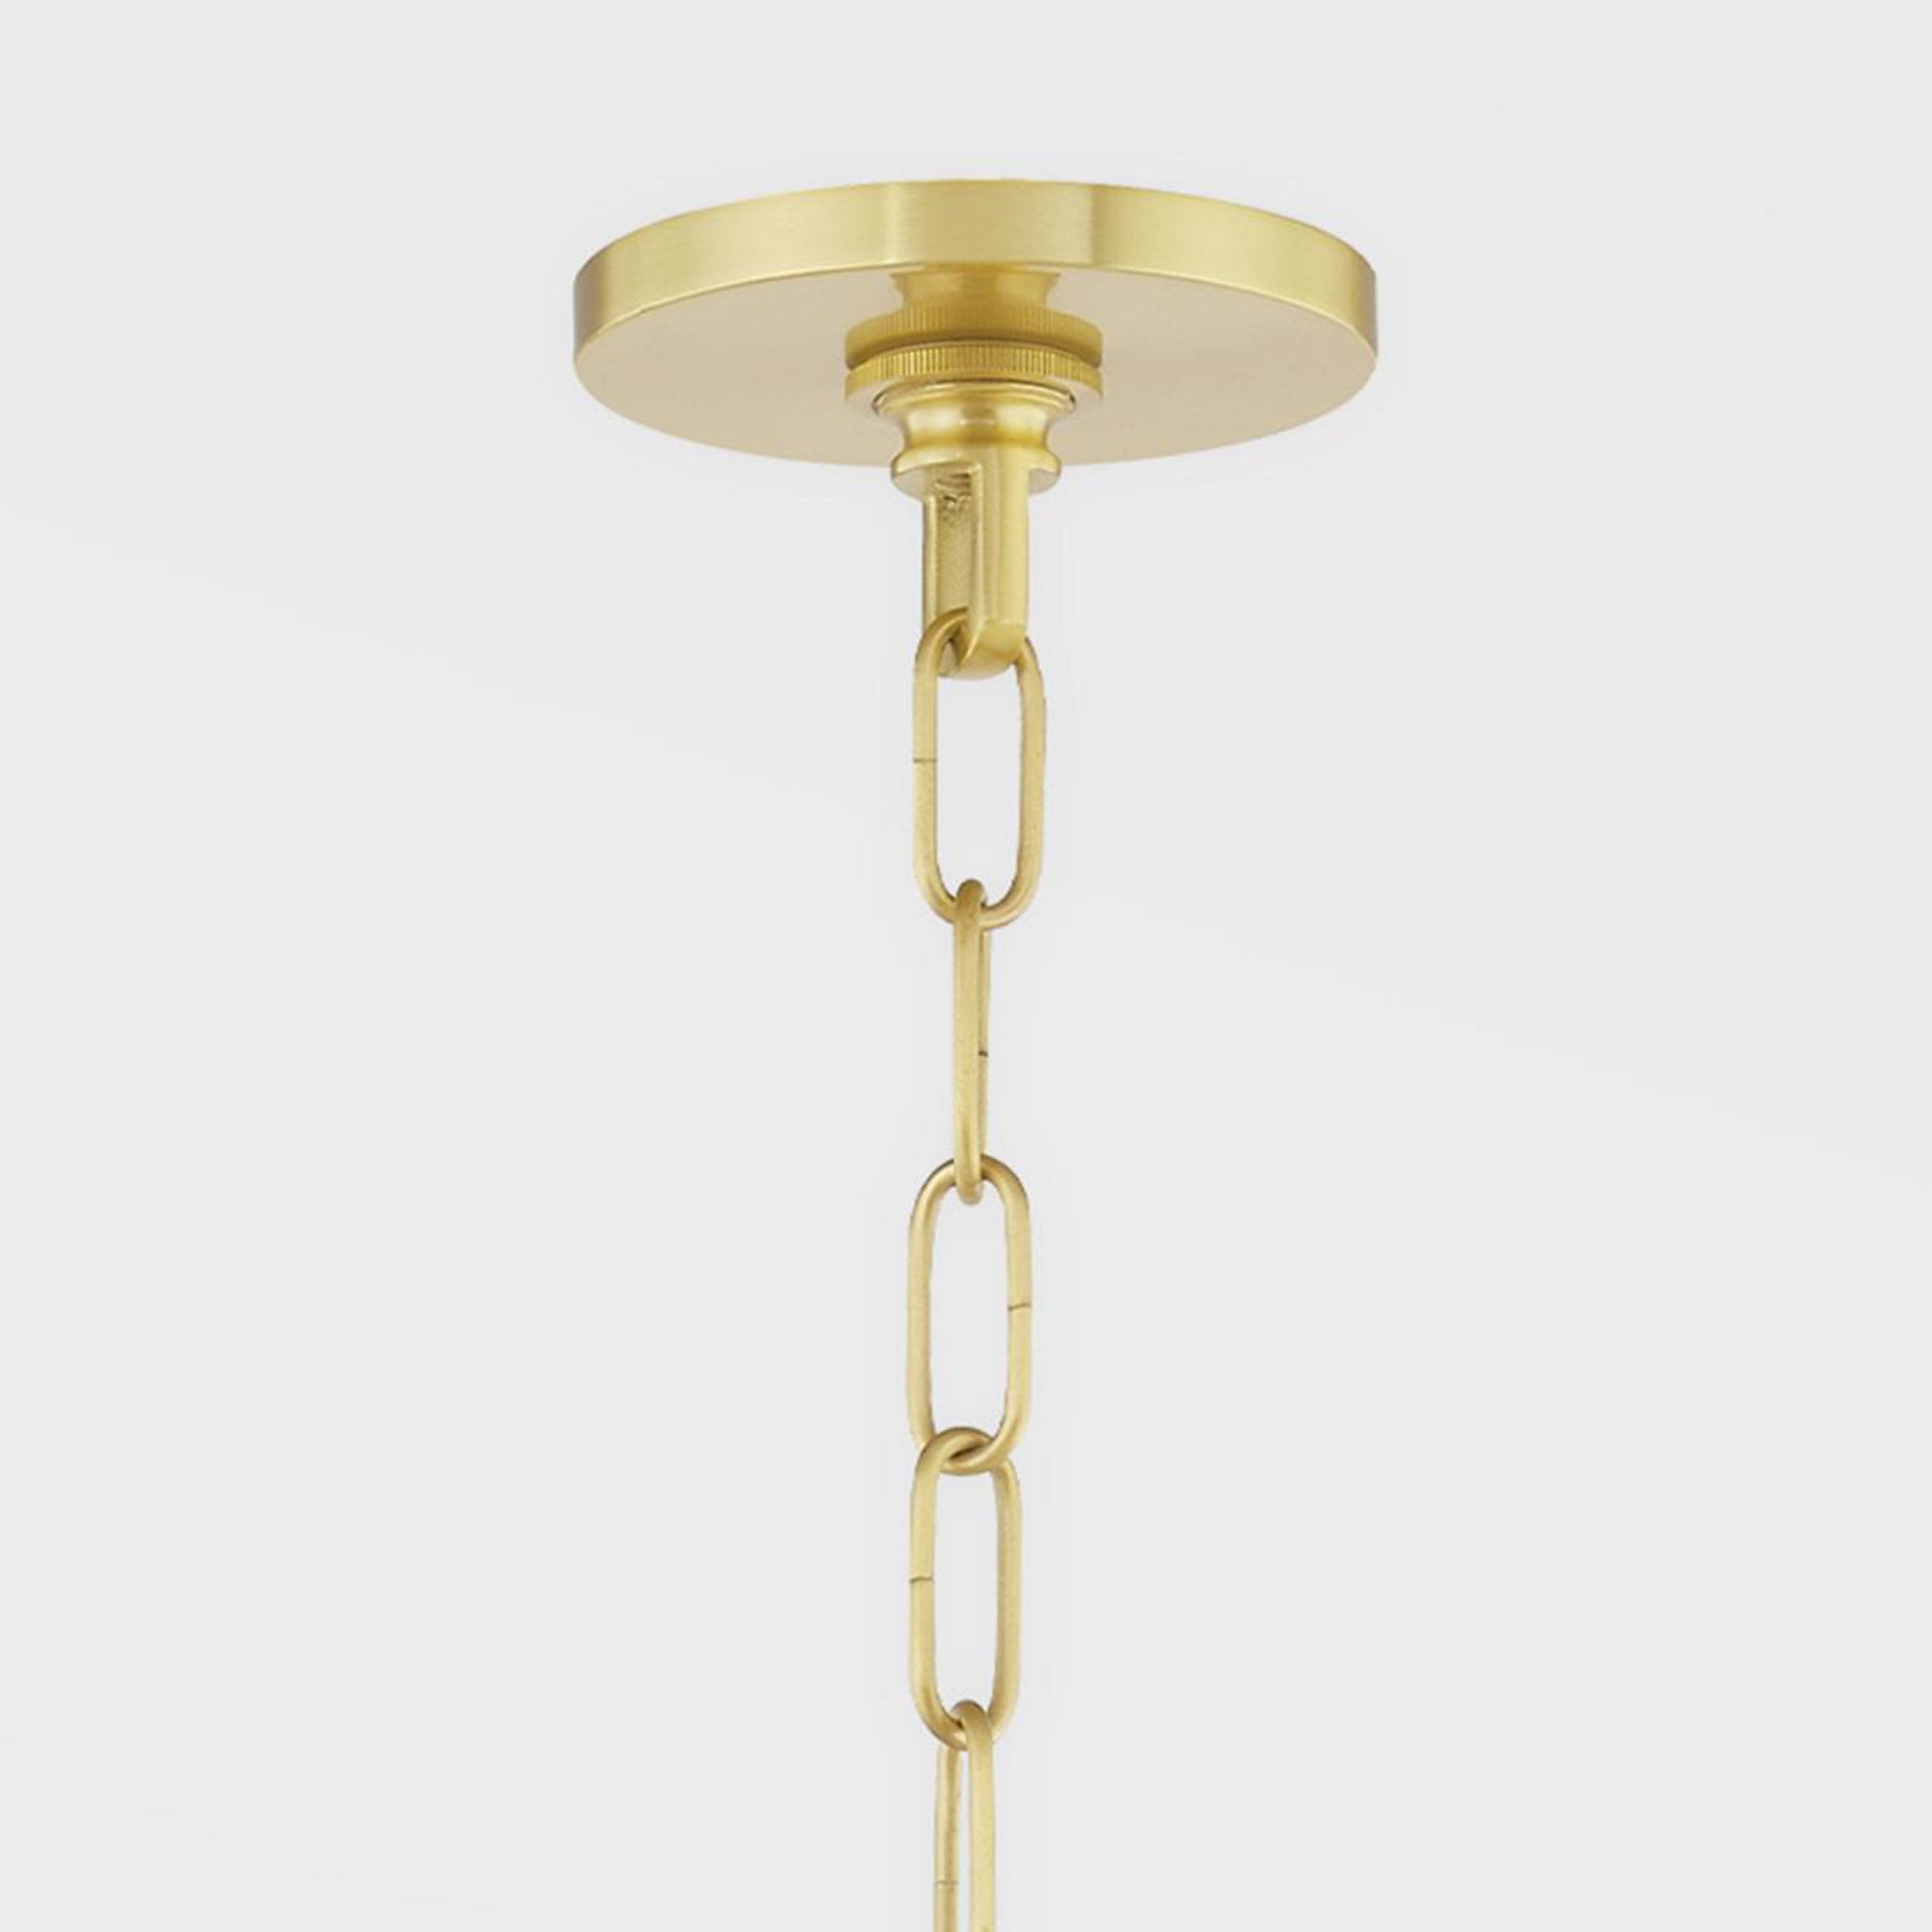 Olivia 1-Light Wall Sconce in Aged Brass